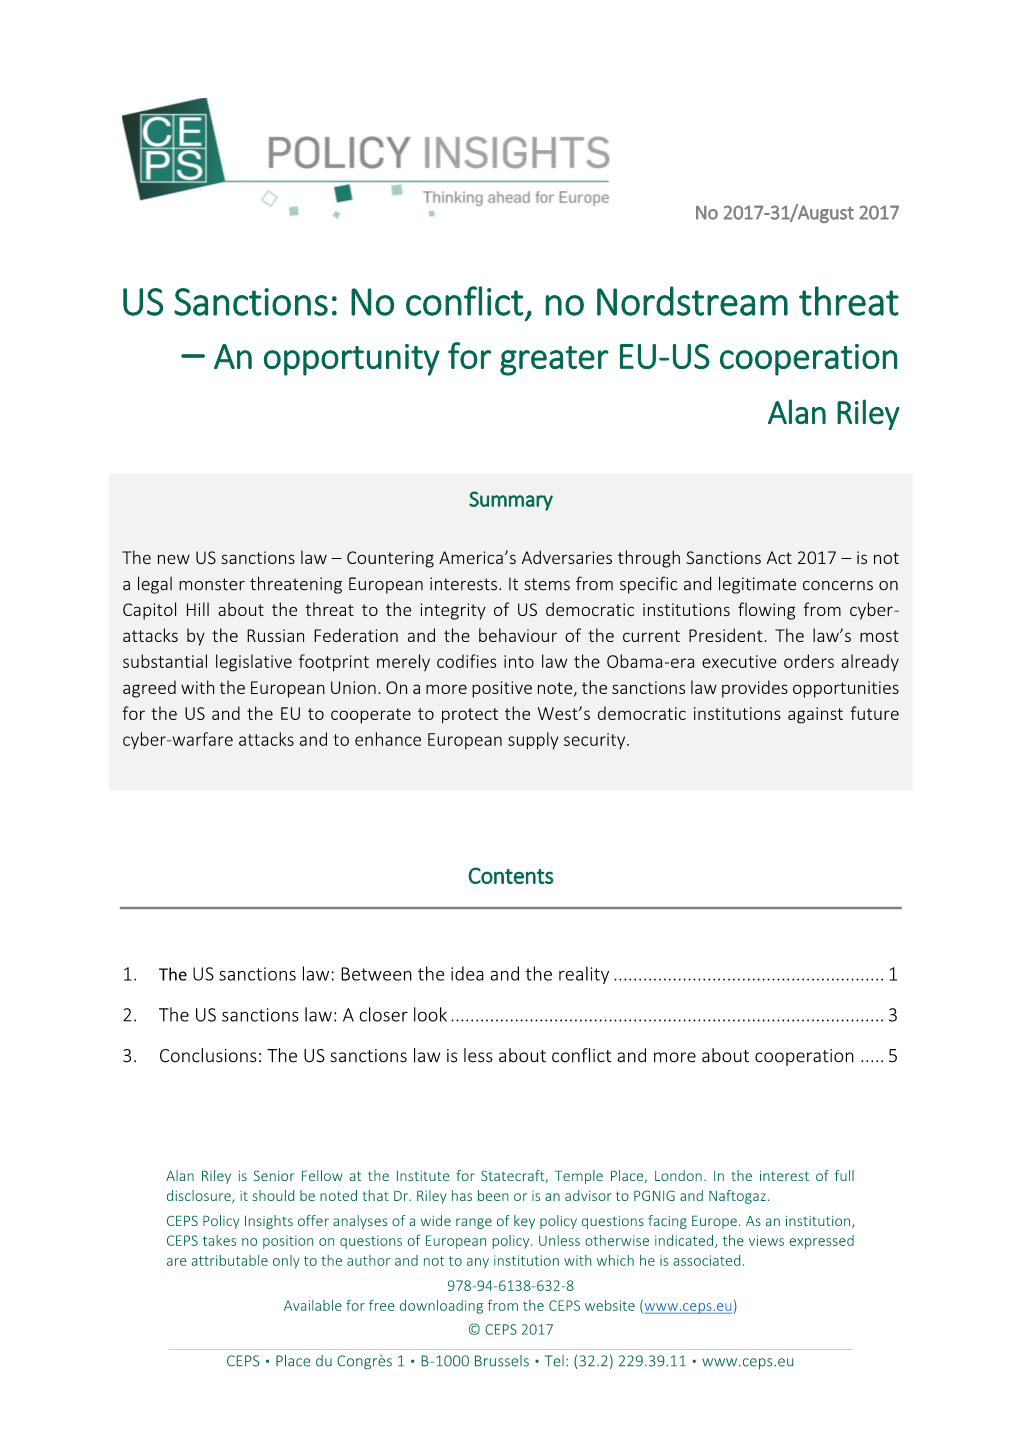 US Sanctions: No Conflict, No Nordstream Threat – an Opportunity for Greater EU-US Cooperation Alan Riley